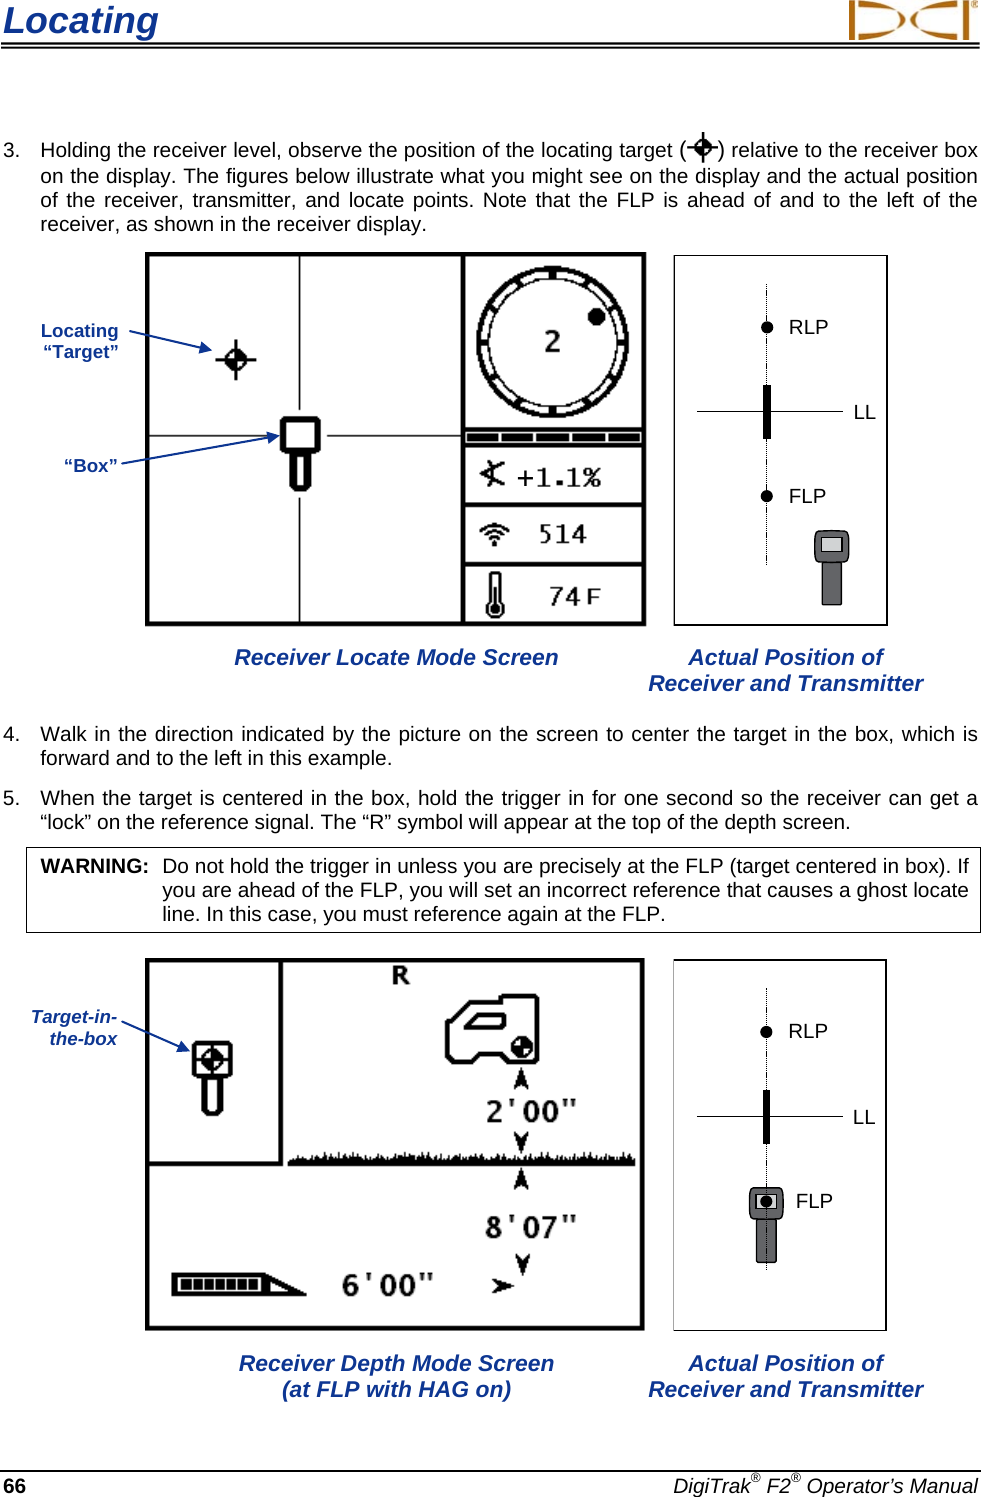 Locating     66 DigiTrak® F2® Operator’s Manual 3. Holding the receiver level, observe the position of the locating target ( ) relative to the receiver box on the display. The figures below illustrate what you might see on the display and the actual position of the receiver, transmitter, and locate points. Note that the FLP is ahead of and to the left of the receiver, as shown in the receiver display.   RLPFLPLL Receiver Locate Mode Screen Actual Position of Receiver and Transmitter 4. Walk in the direction indicated by the picture on the screen to center the target in the box, which is forward and to the left in this example. 5. When the target is centered in the box, hold the trigger in for one second so the receiver can get a “lock” on the reference signal. The “R” symbol will appear at the top of the depth screen.  WARNING: Do not hold the trigger in unless you are precisely at the FLP (target centered in box). If you are ahead of the FLP, you will set an incorrect reference that causes a ghost locate line. In this case, you must reference again at the FLP.    RLPFLPLL Receiver Depth Mode Screen  (at FLP with HAG on) Actual Position of Receiver and Transmitter Locating “Target” “Box” Target-in-the-box  + 